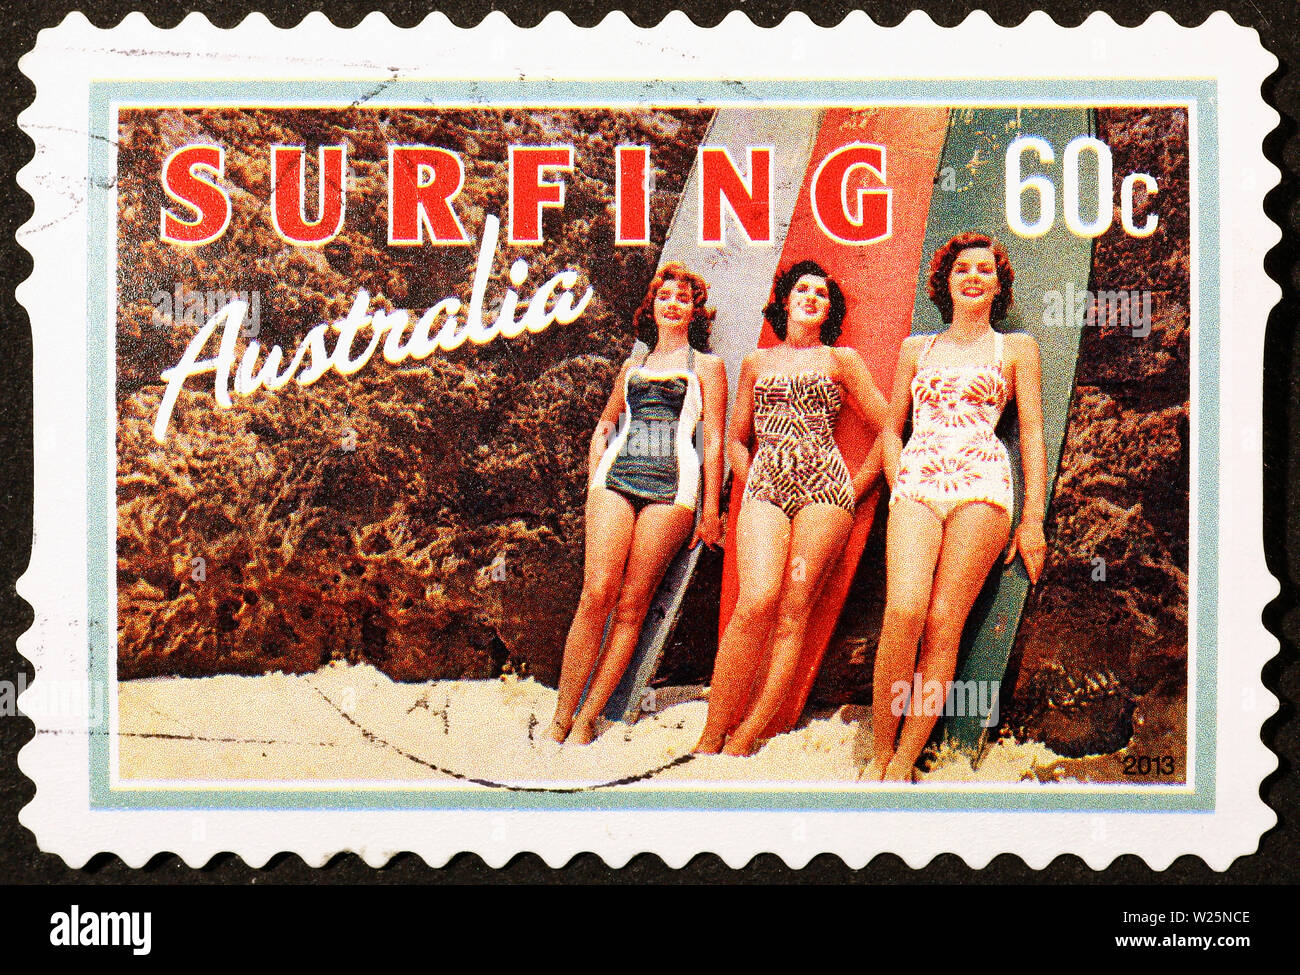 Women and surfboards on vintage australian postage stamp Stock Photo